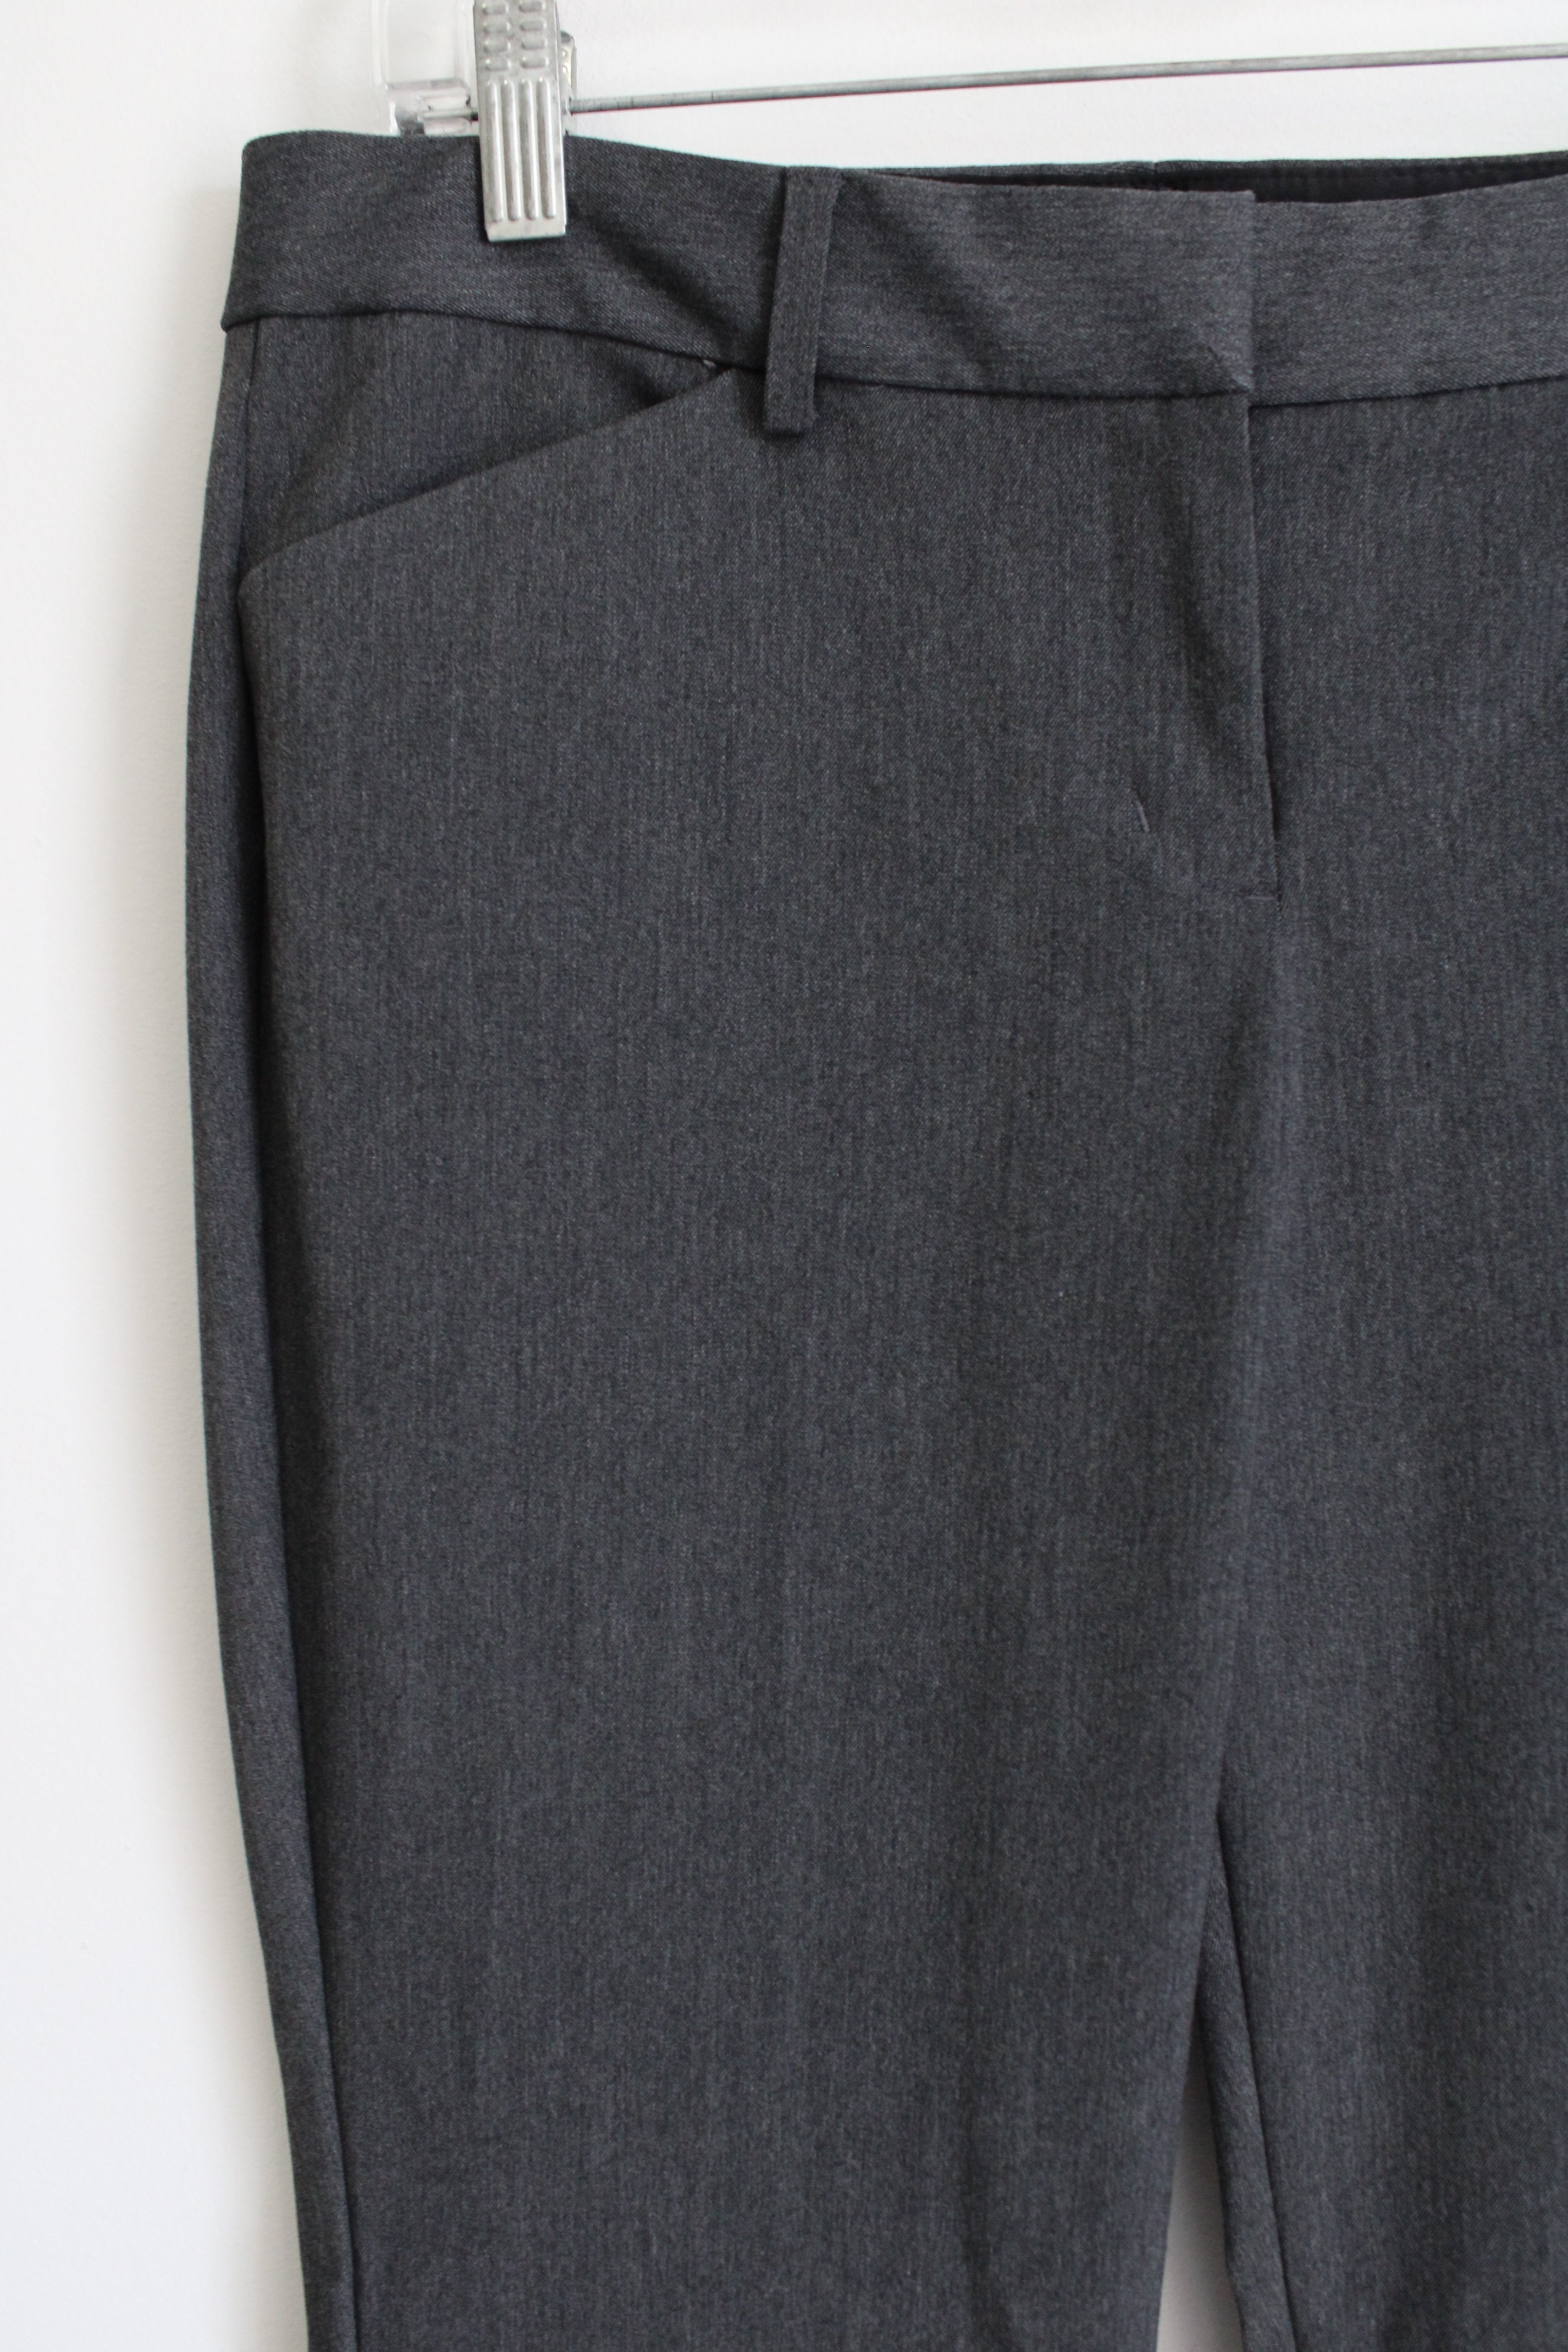 Express Editor Barely Boot Low Rise Gray Trouser Pant | 8 Short